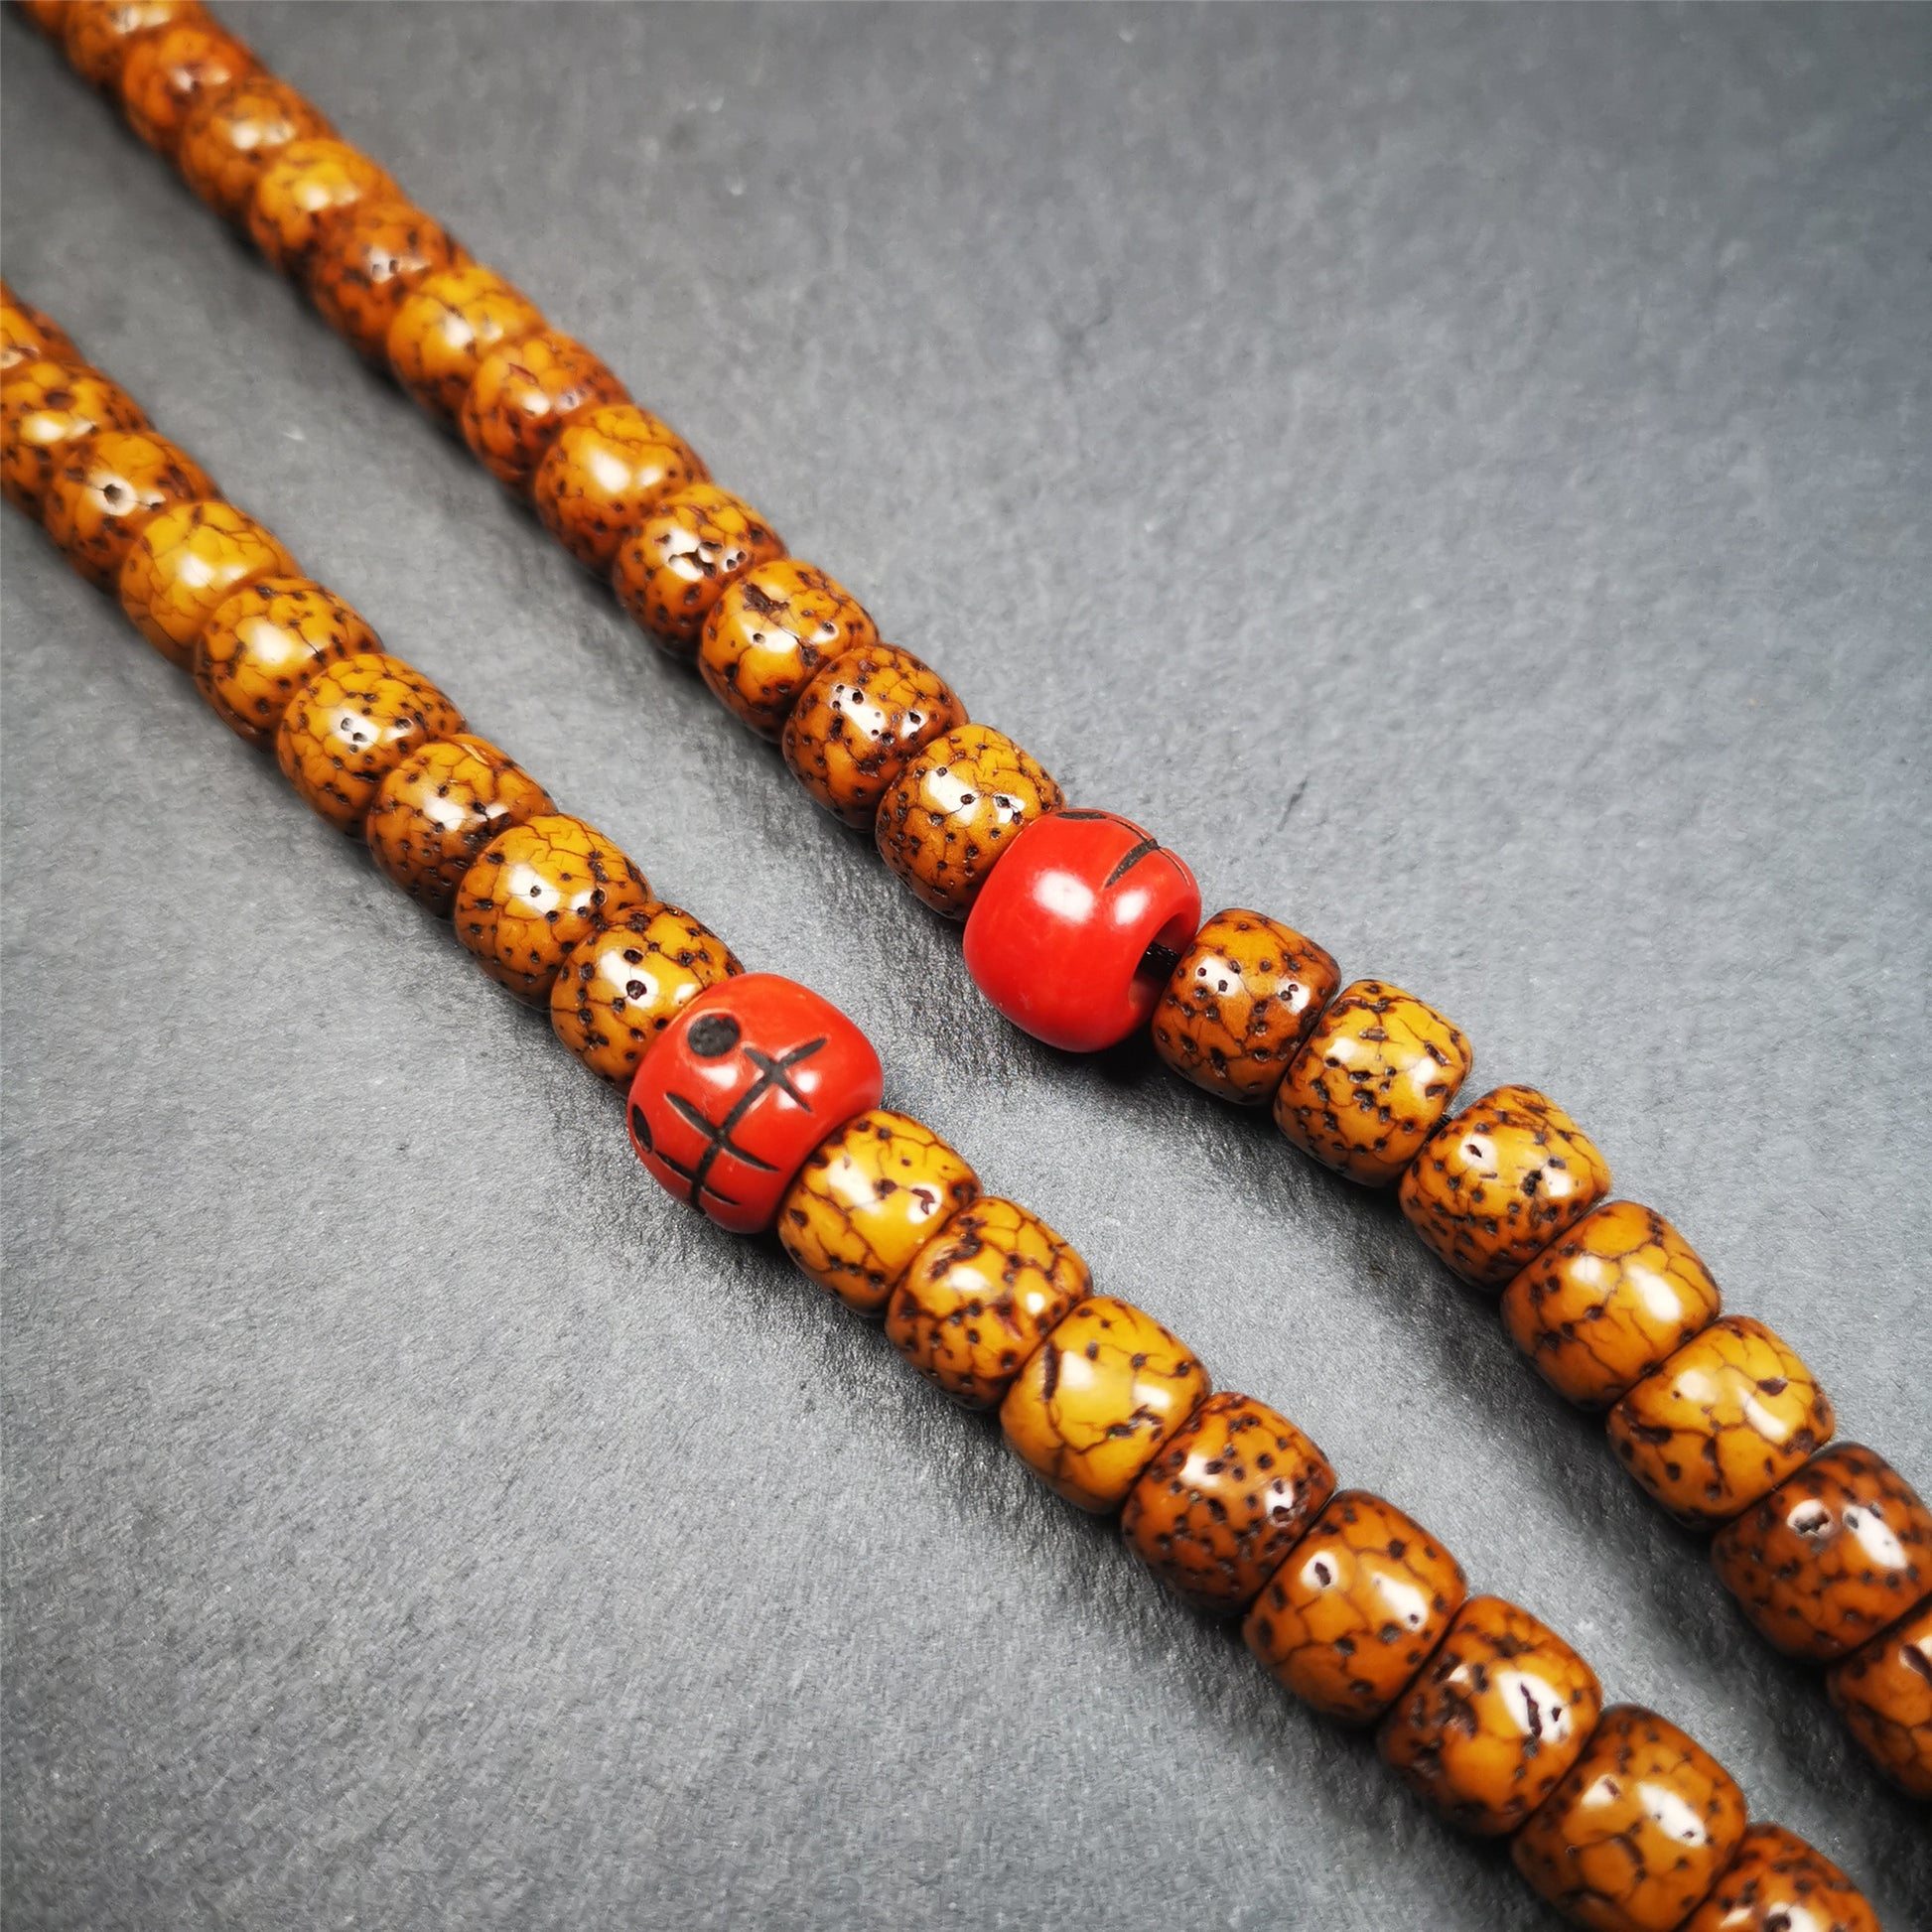 These marker beads were handmade by Tibetan craftsmen and come from Hepo Town, Baiyu County, the birthplace of the famous Tibetan handicrafts. It is made of plastic,carved skull pattern,red color,size is 0.4" × 0.3".